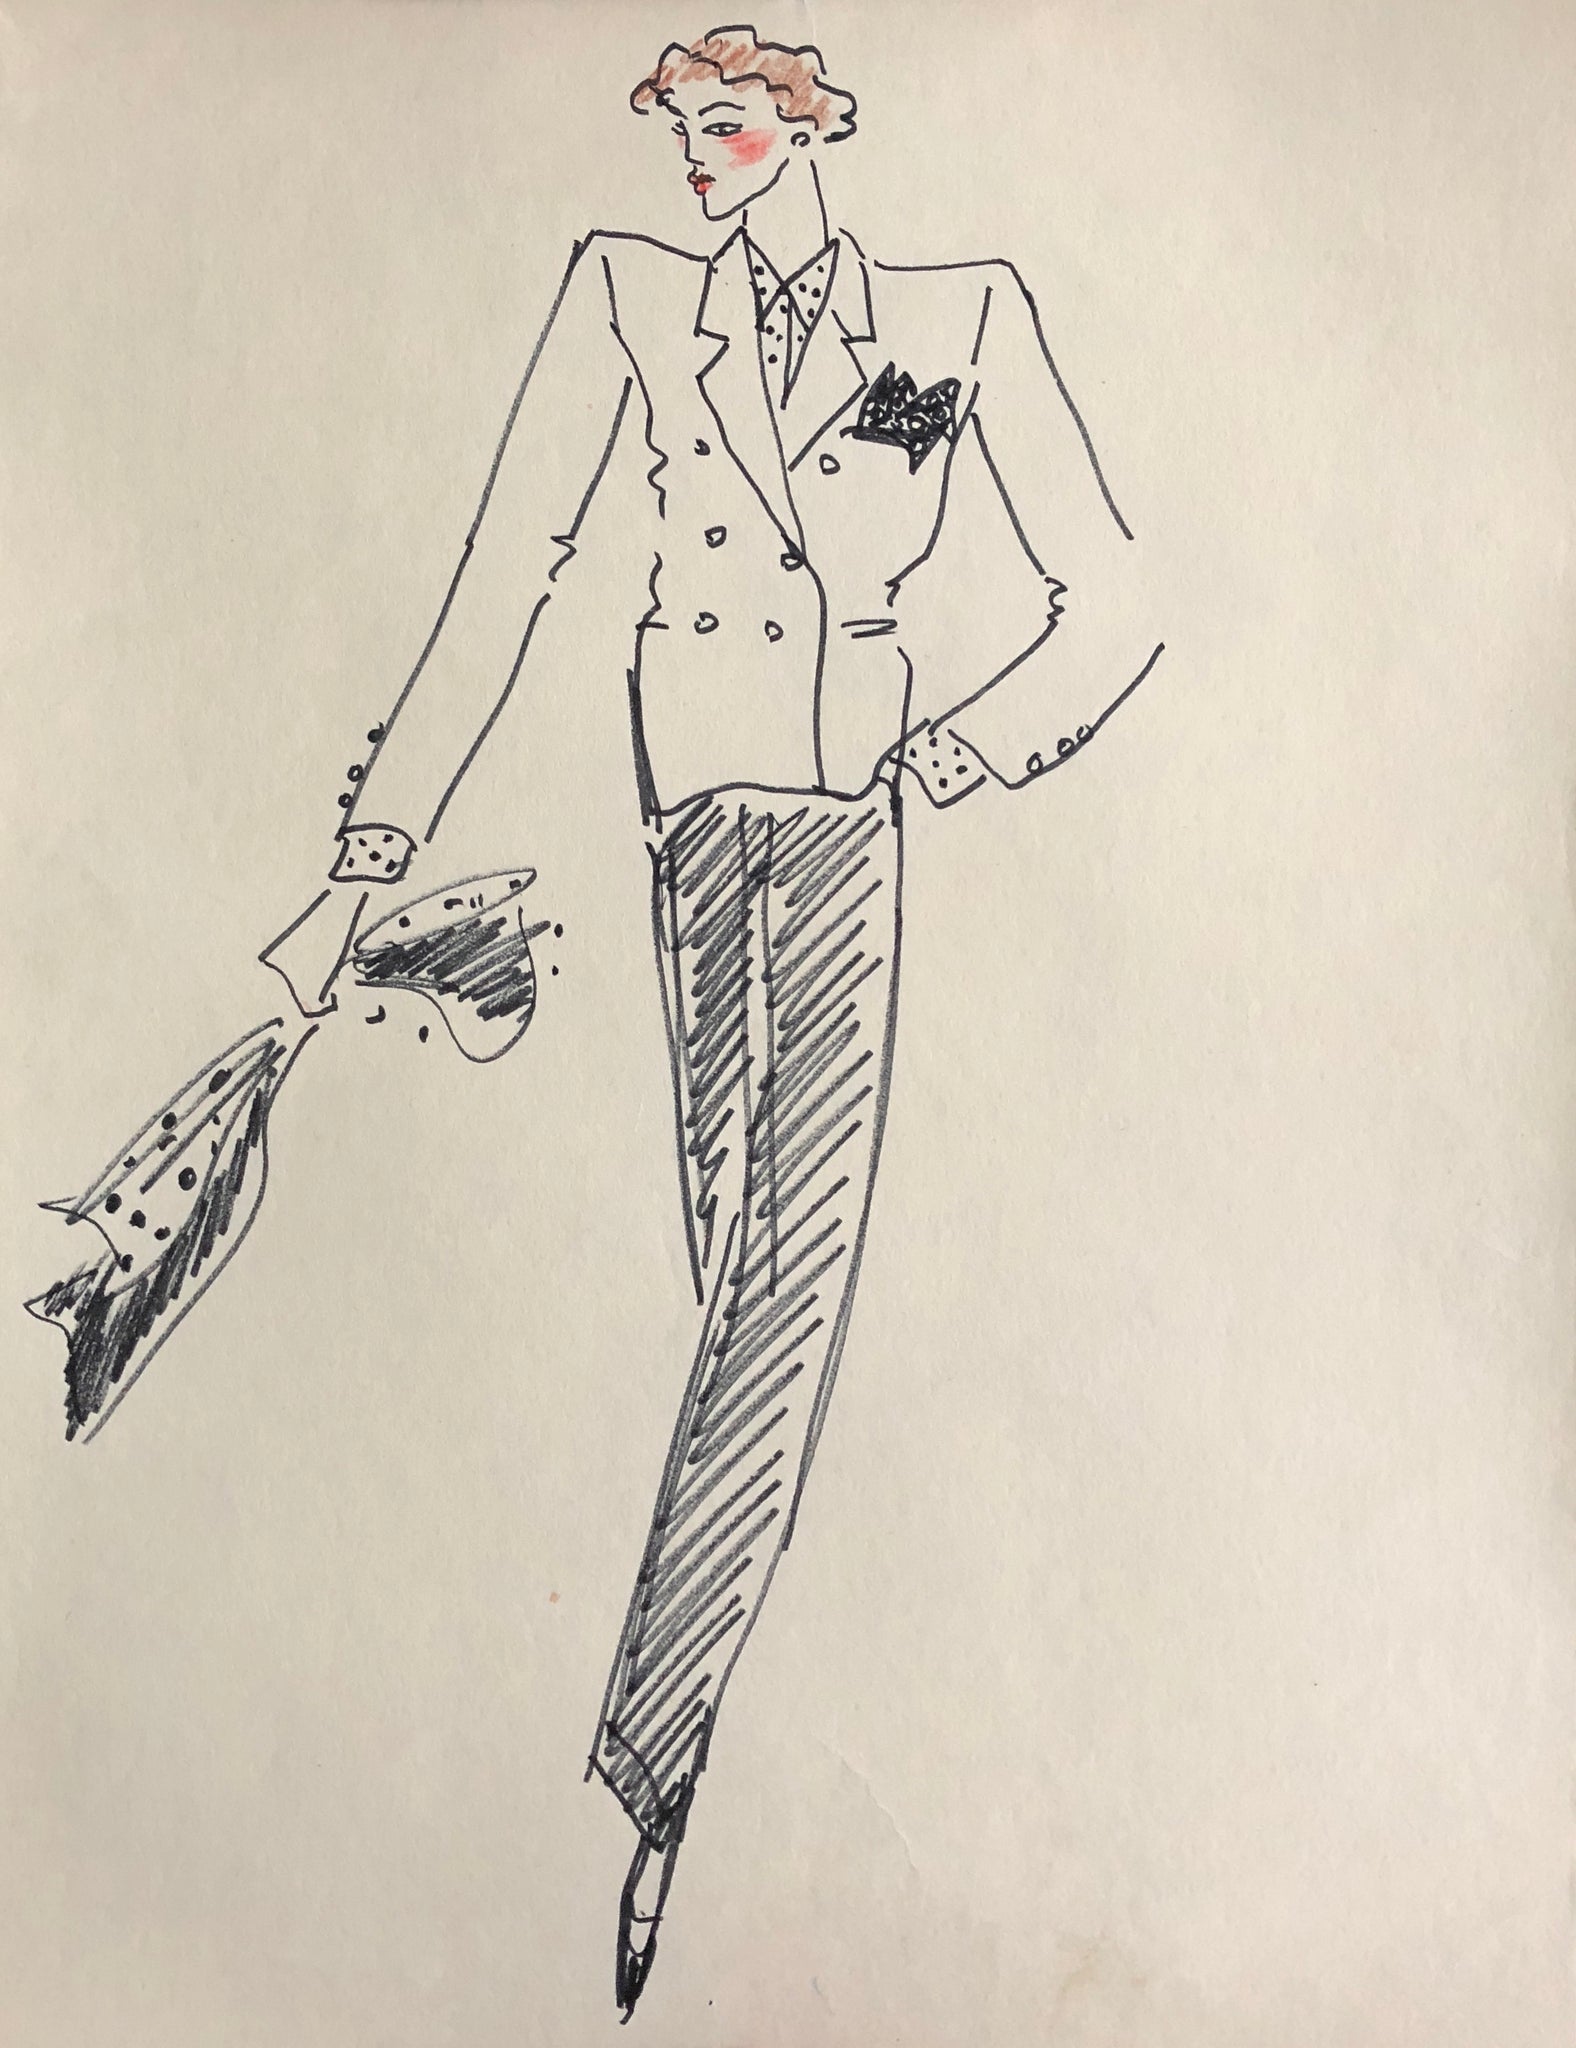 Saint Laurent, Yves. (1936–2008) How to modify an outfit: Collection of Original Fashion Drawings for an unpublished Mirabella feature